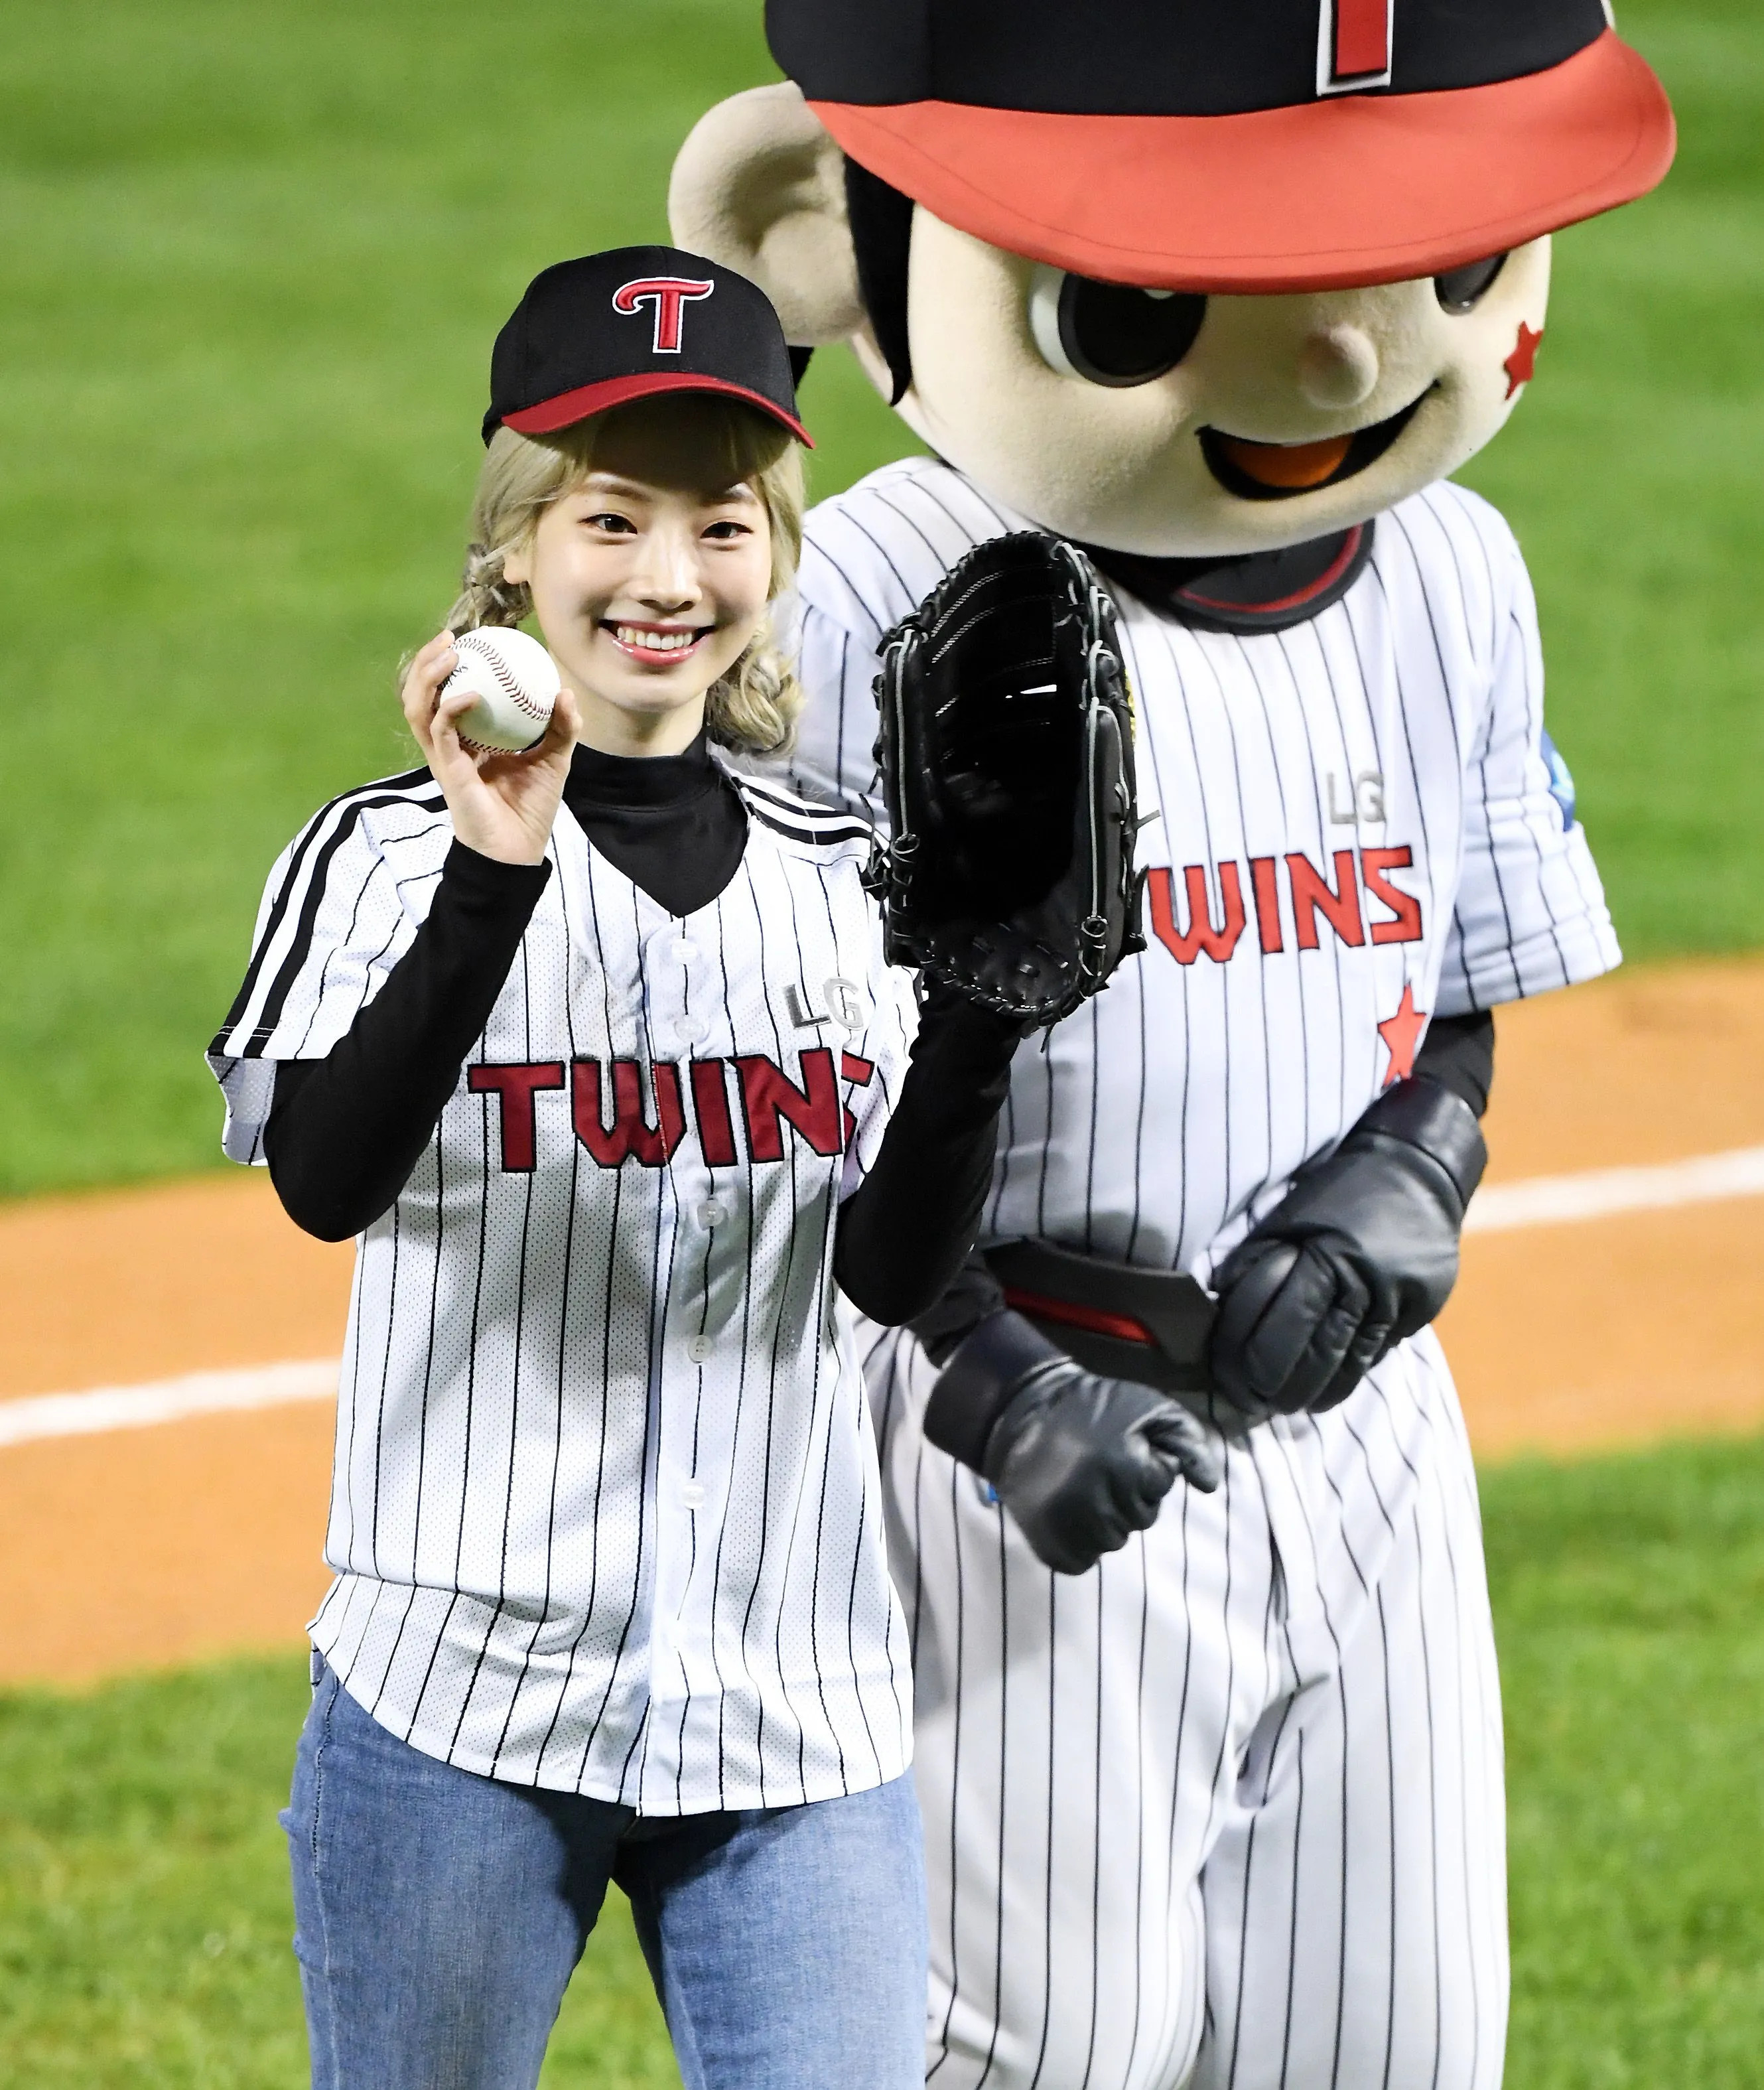 191010 TWICE's Dahyun throwing first pitch for the LG Twins